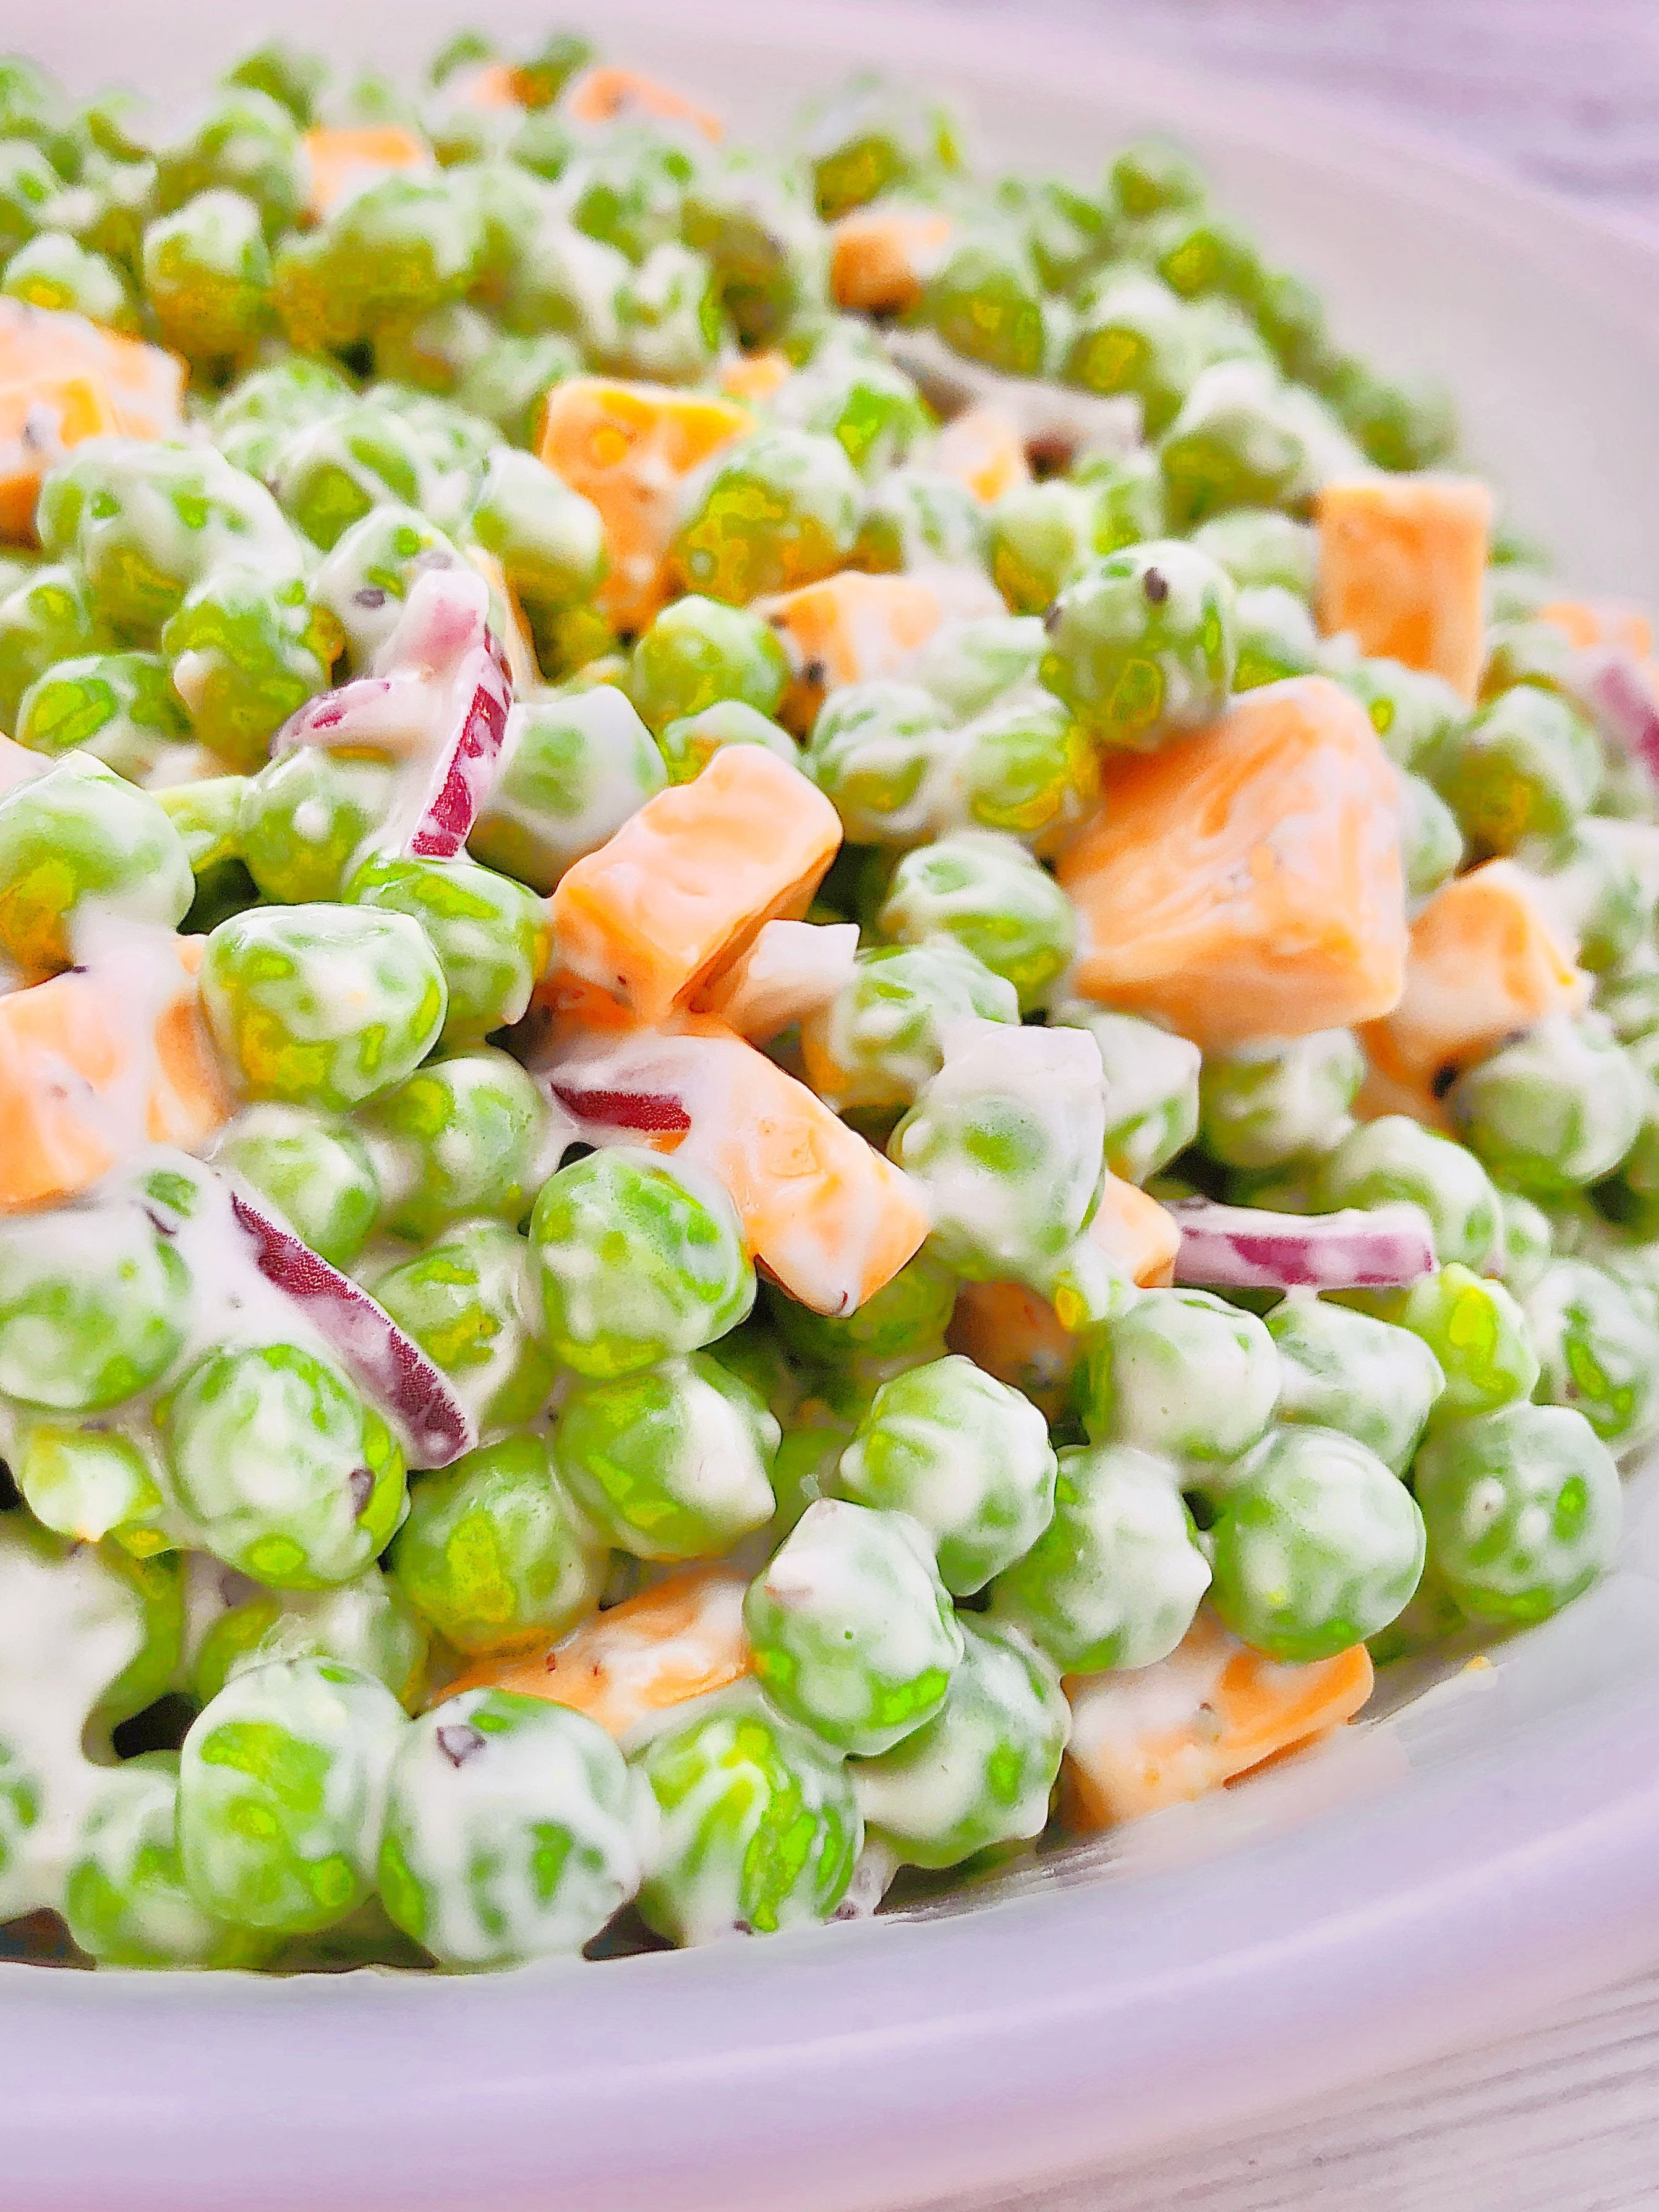 Green Pea and Cheddar Salad - A classic side dish made with only a handful of simple plant-based ingredients!

#veganpotluck #veganeasterrecipes #plantbasedsidedish #thiswifecooksrecipes #easyveganrecipes #veganbrunchrecipes #veganpeasalad #veganbbqside via @thiswifecooks